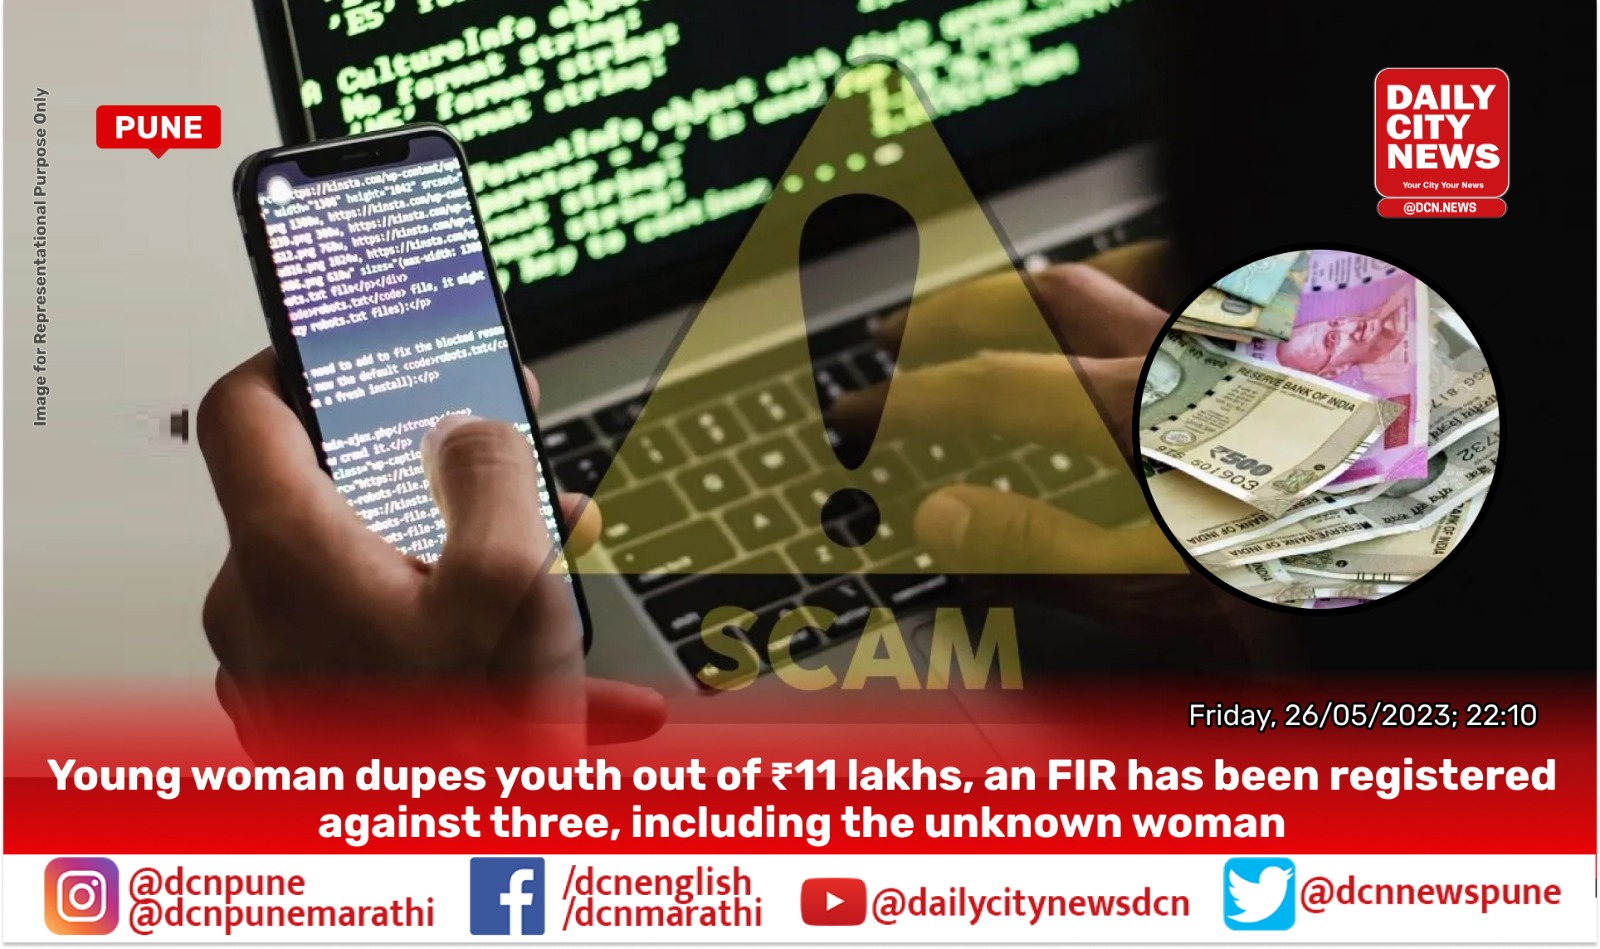  Young woman dupes youth out of ₹11 lakhs, an FIR has been registered against three, including the unknown woman